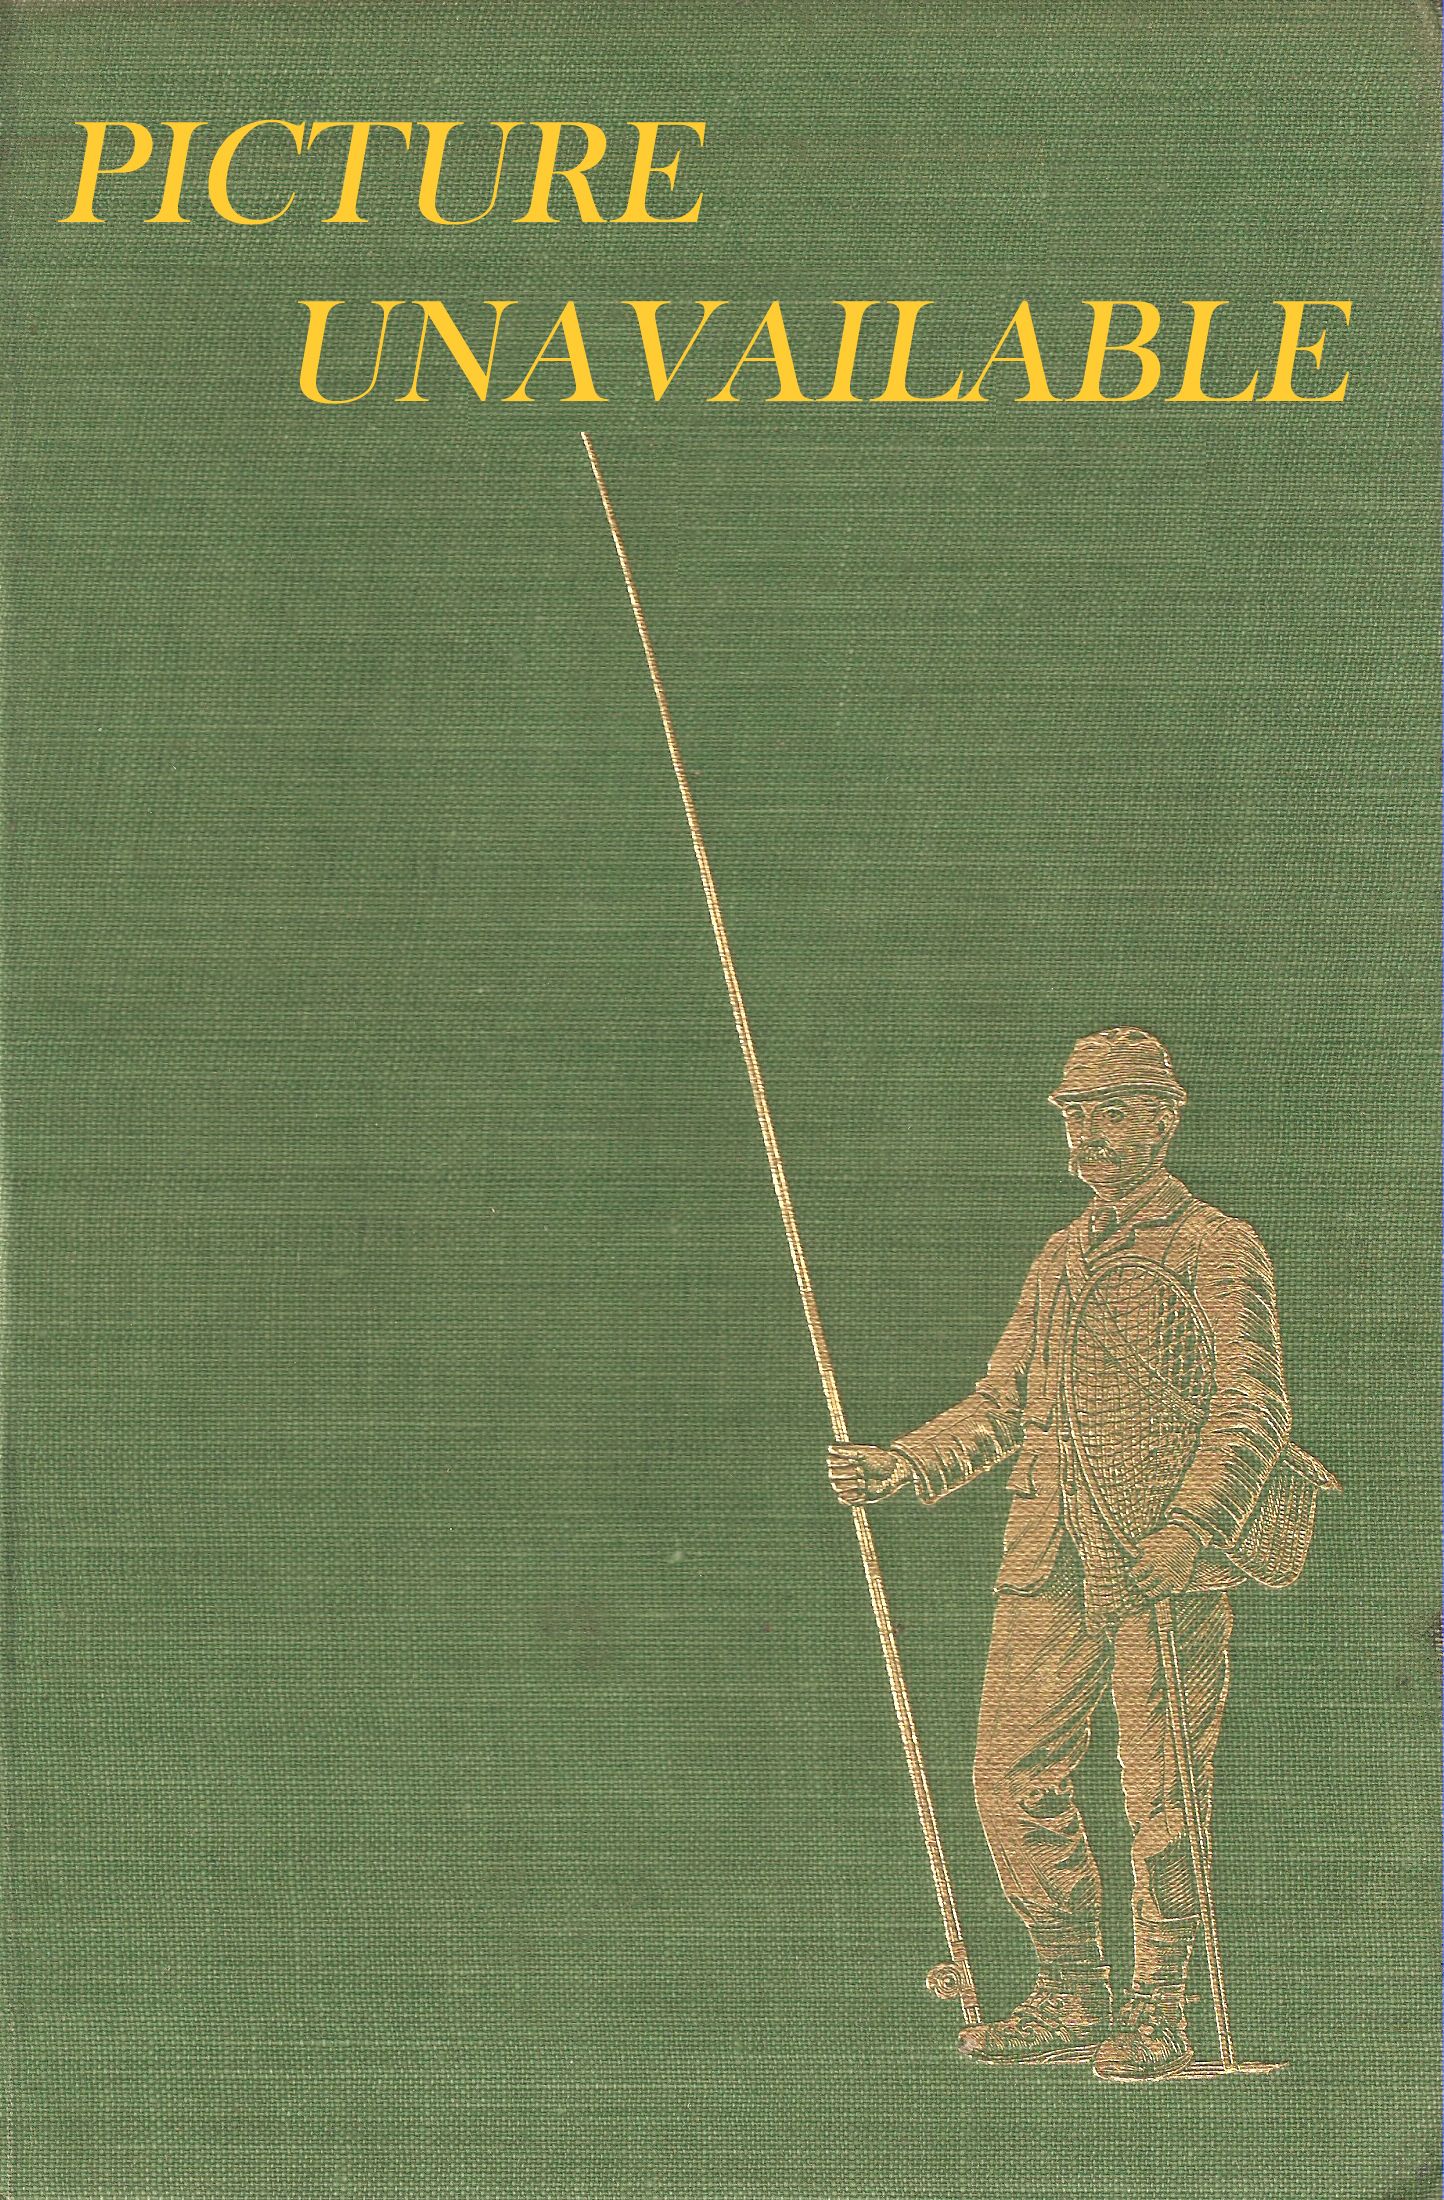 GAME FISHING: METHODS AND MEMORIES. By C.W.K. Mundle.